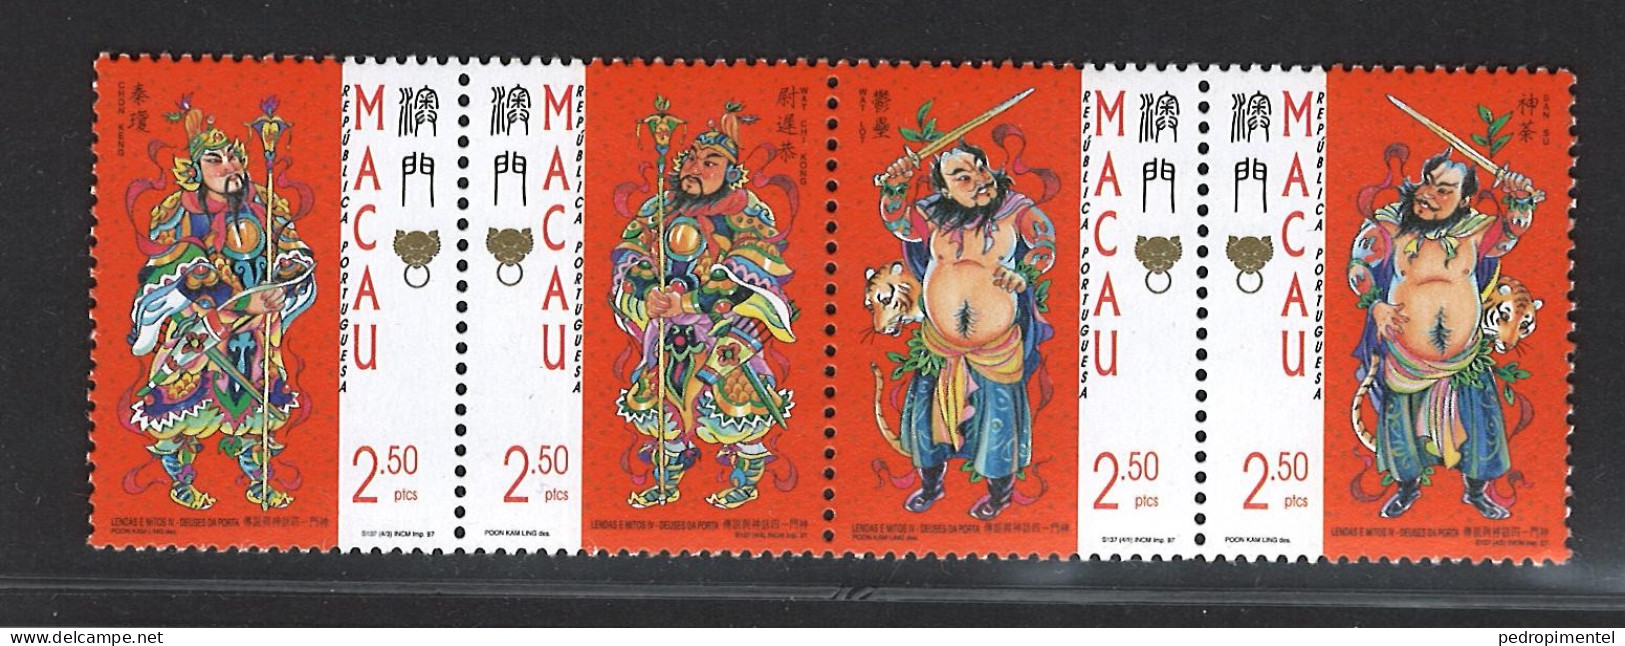 Portugal Macau 1997 "Legends & Myths IV" Condition MNH Mundifil #893-896+897 (minisheet+block+stamps) - Unused Stamps